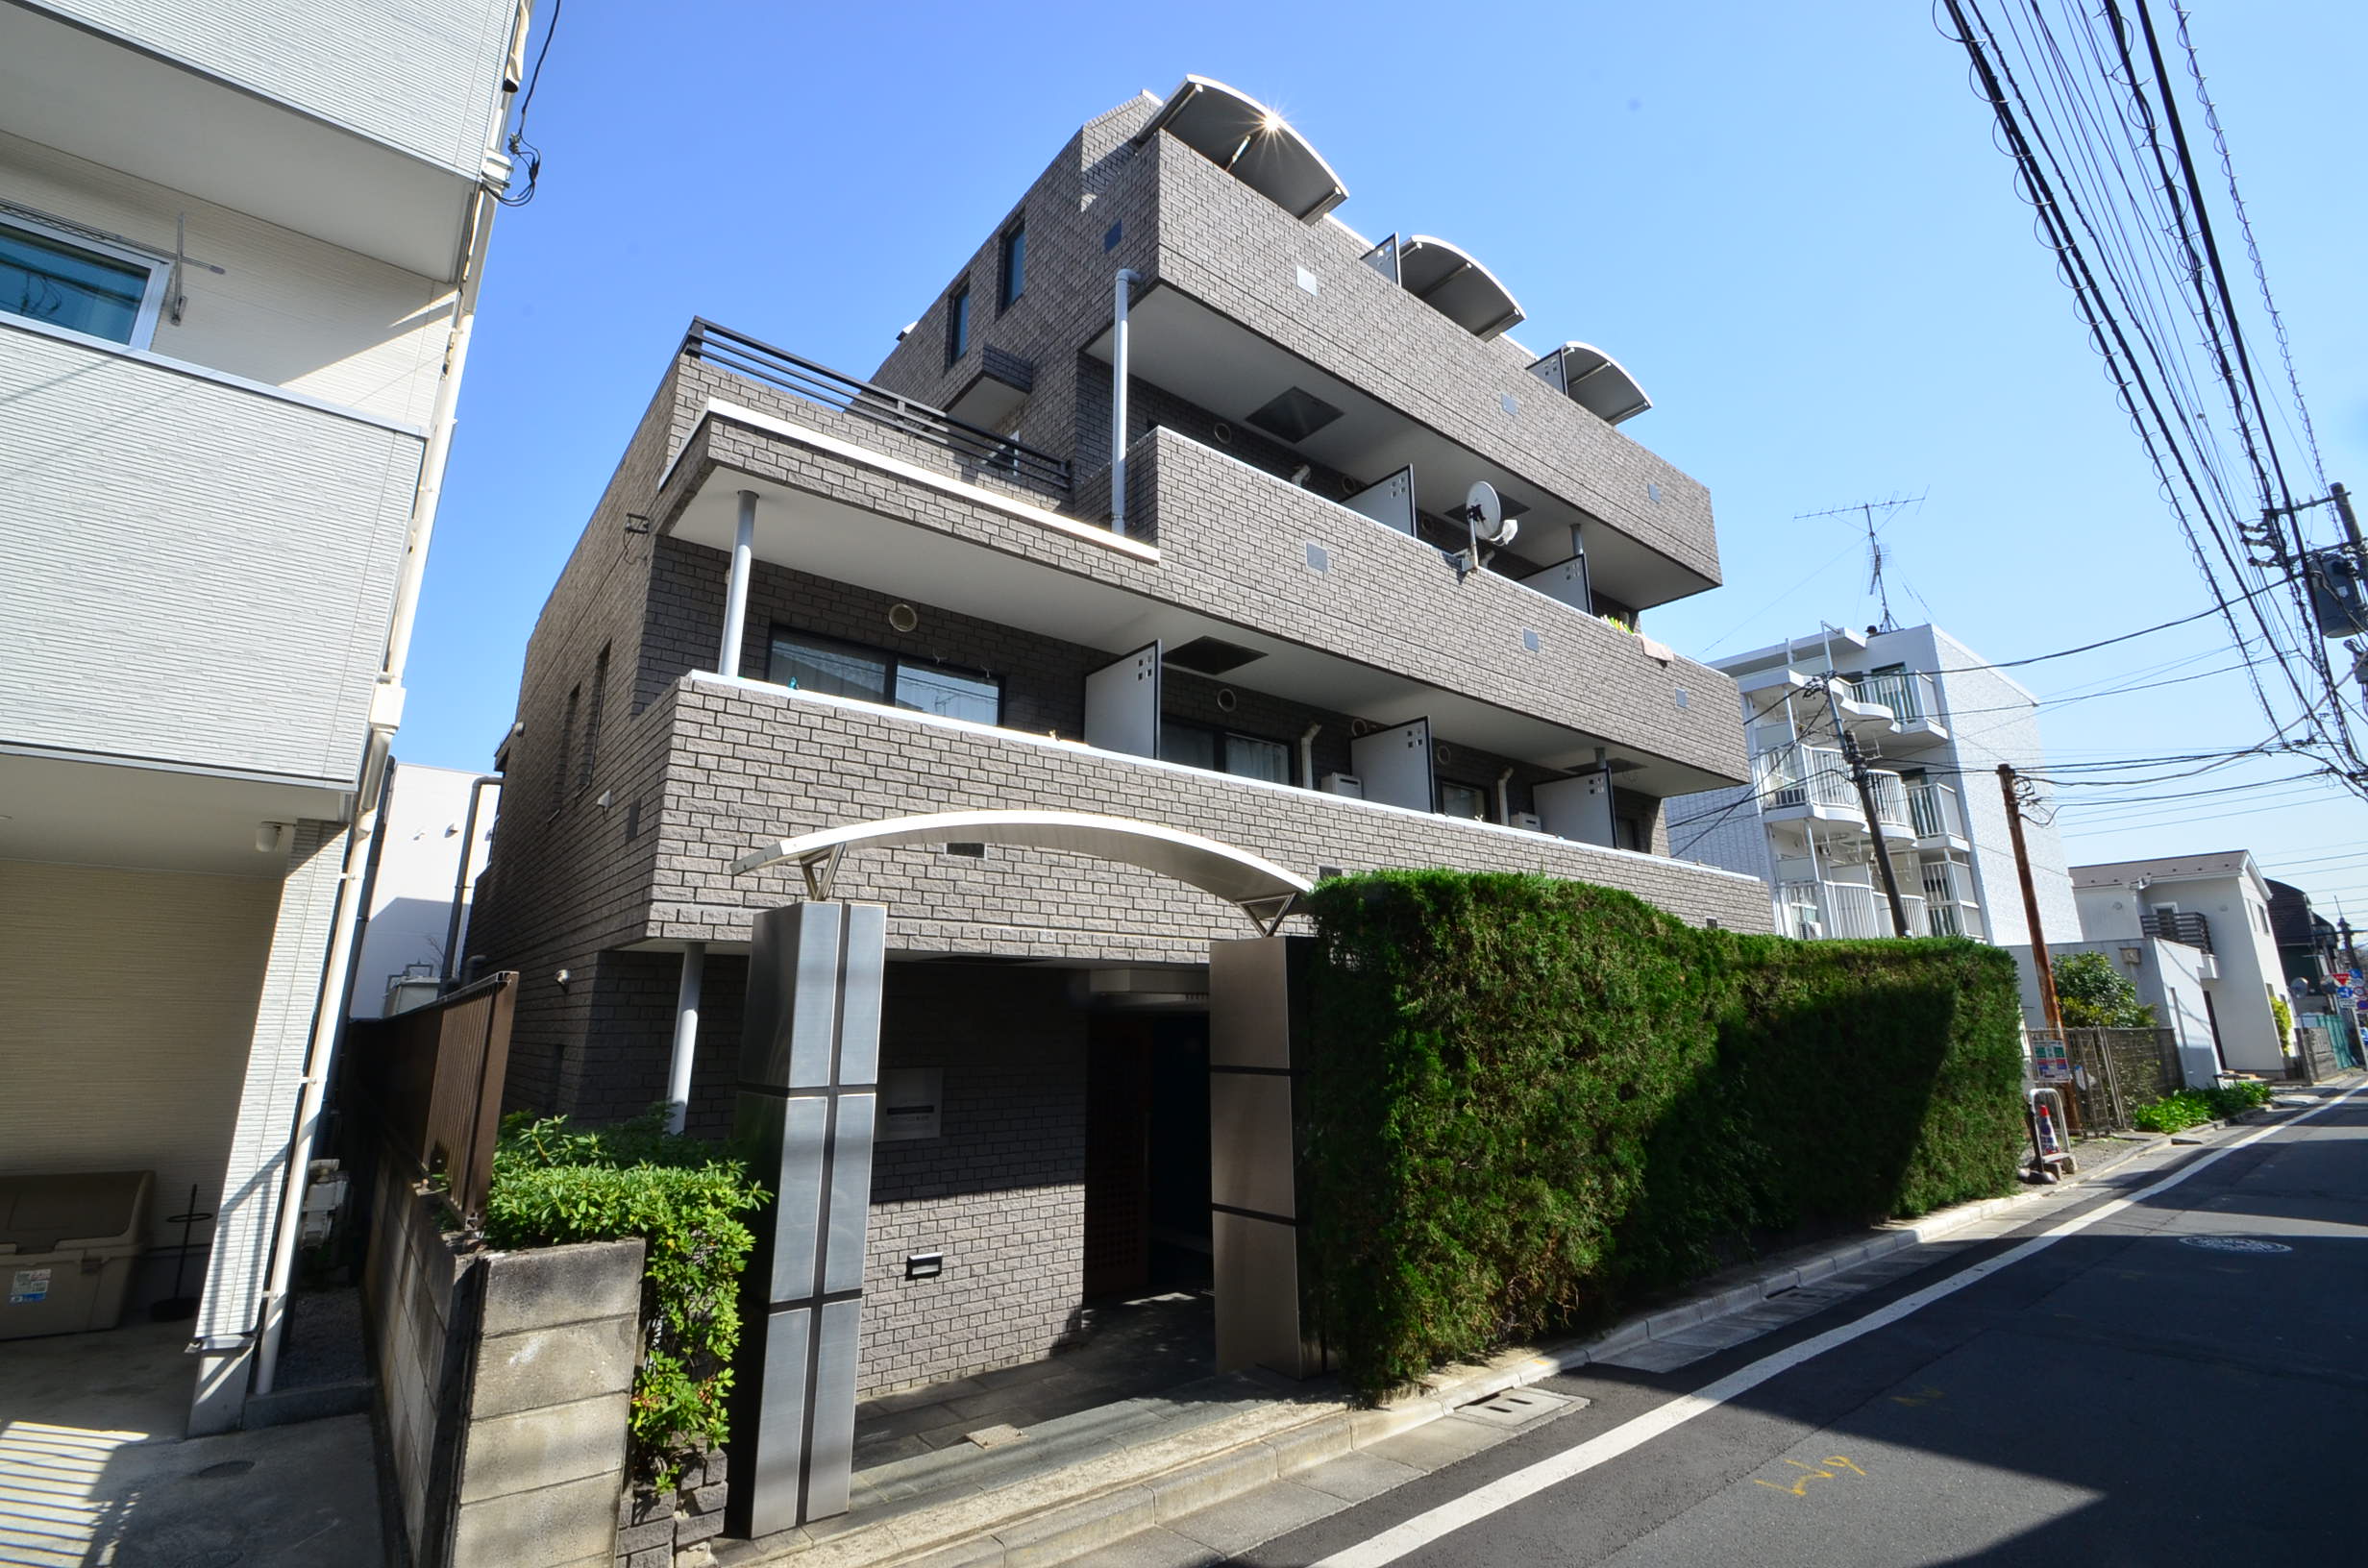 6569Tohto Monthly Lalation Nakai<br/>5 minute walk from Nakai Station! You can use 2 lines, Toei Oedo Line and Seibu Shinjuku Line! <br/>Two people can live together.